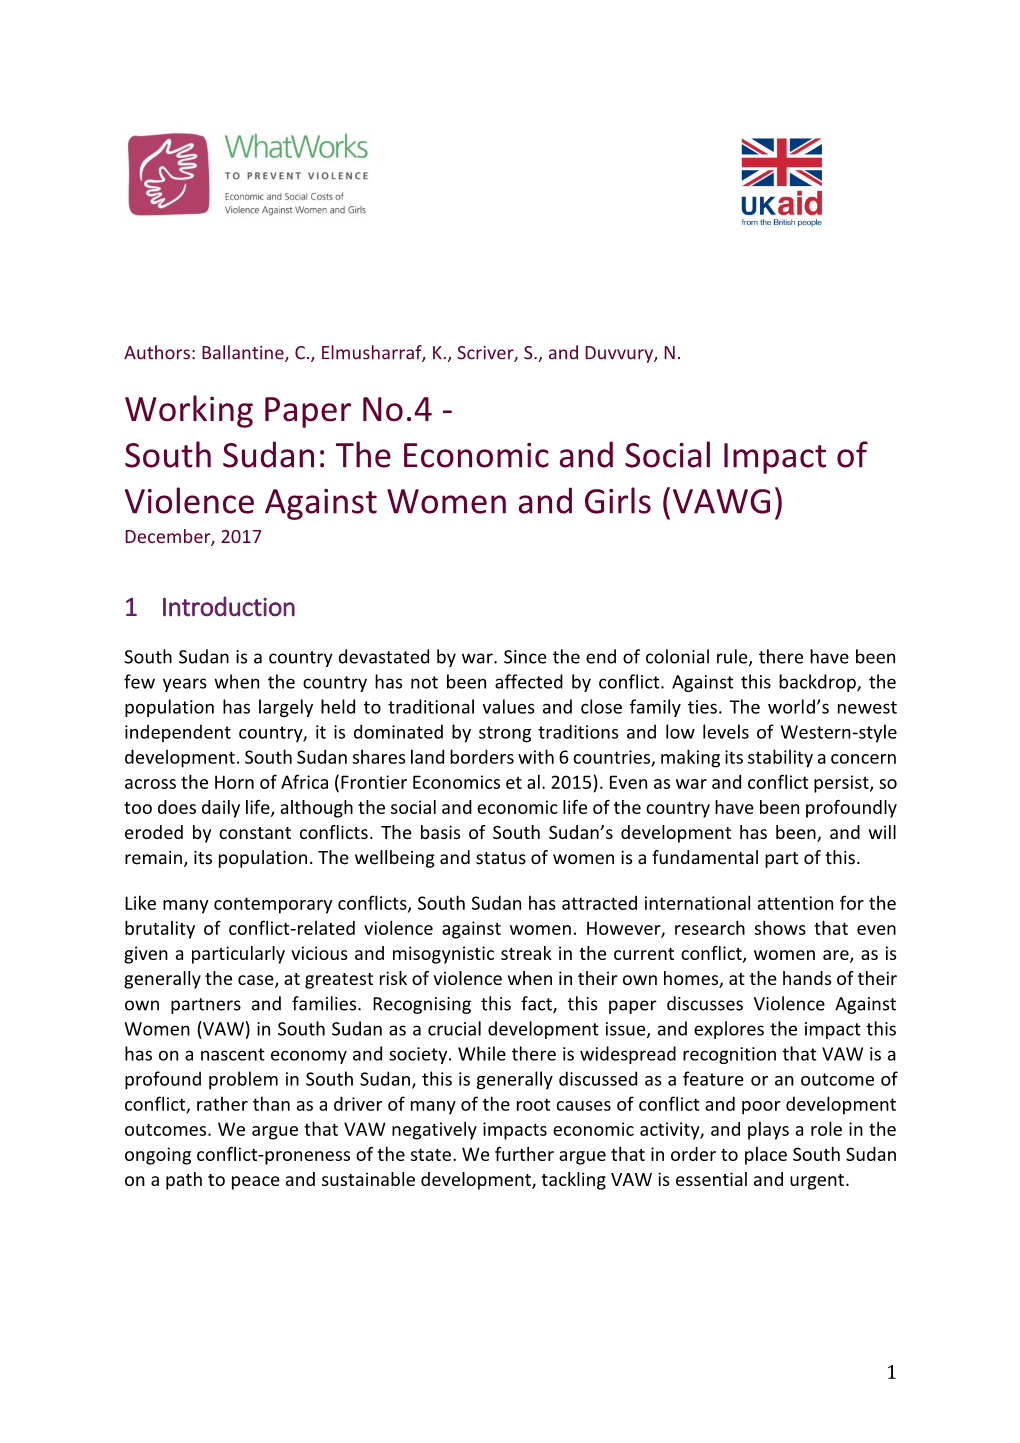 South Sudan: the Economic and Social Impact of Violence Against Women and Girls (VAWG) December, 2017